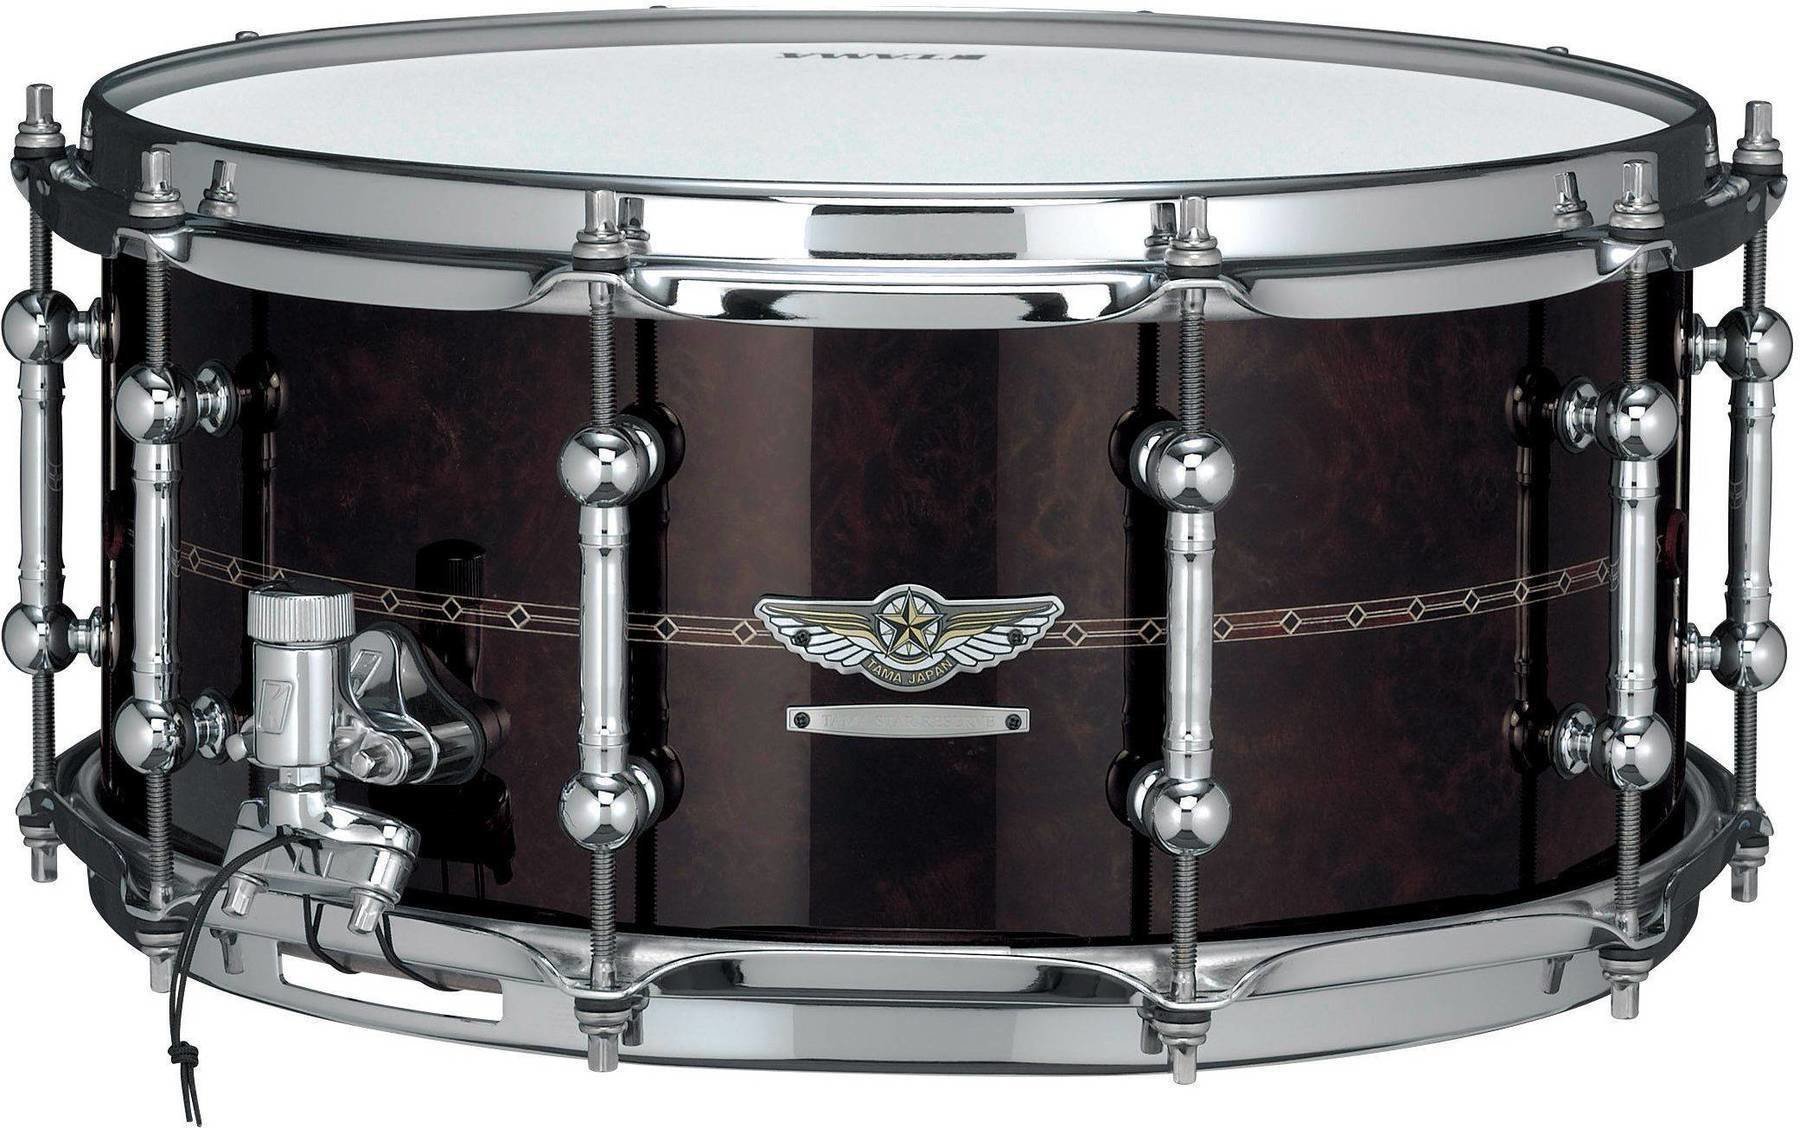 Caisse claire Tama TBWS1465S Star Reserve 14" Gloss Claro Walnut